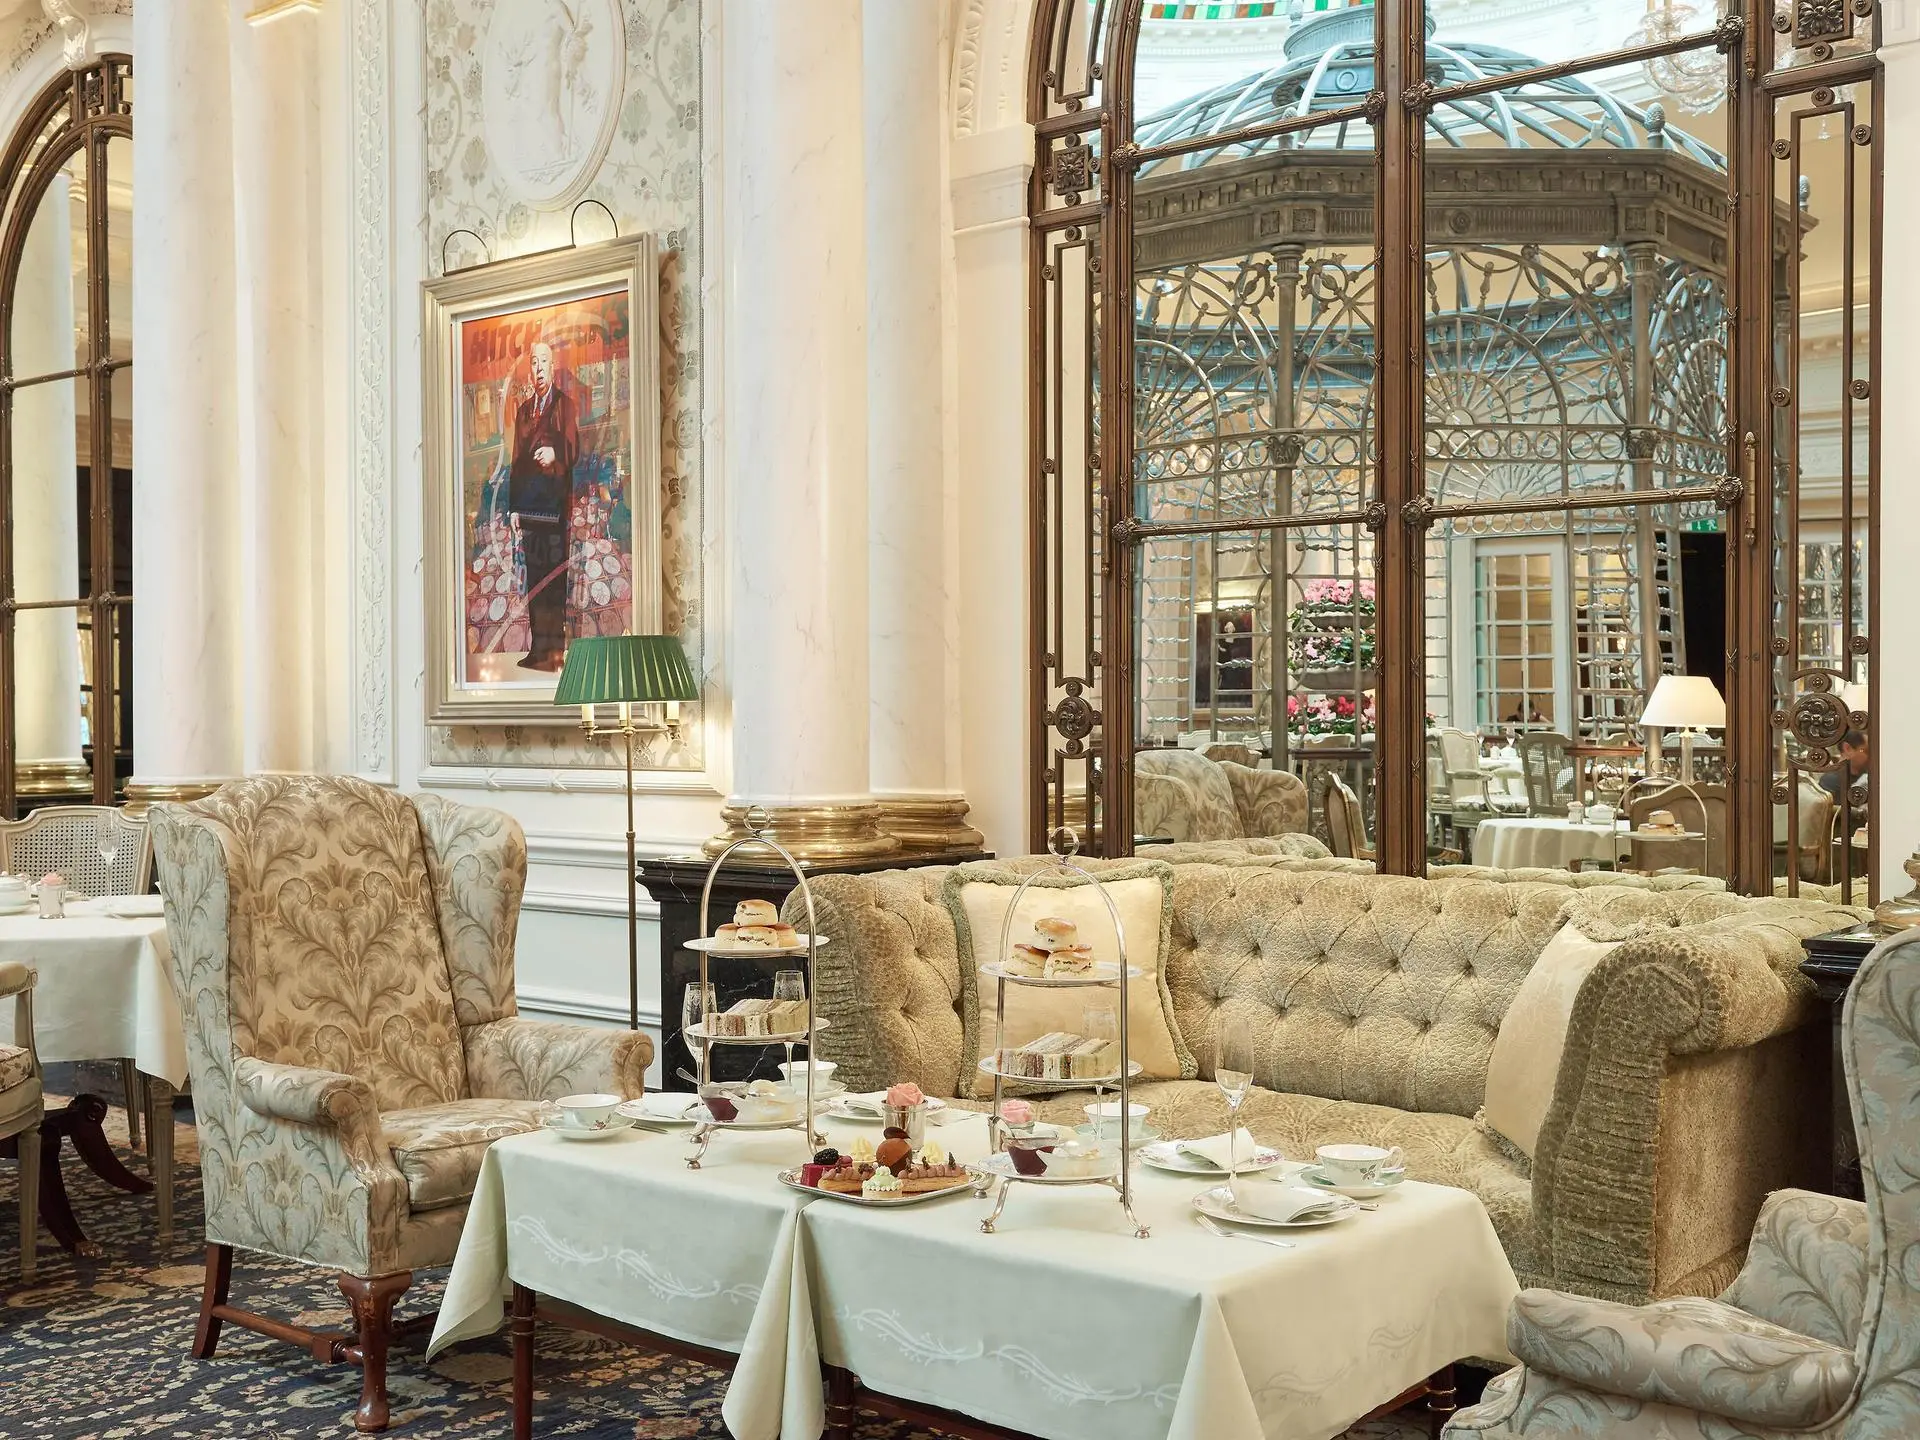 The Savoy_London_Afternoon Tea at the Thames Foyer 01_VIP Trips for Kids